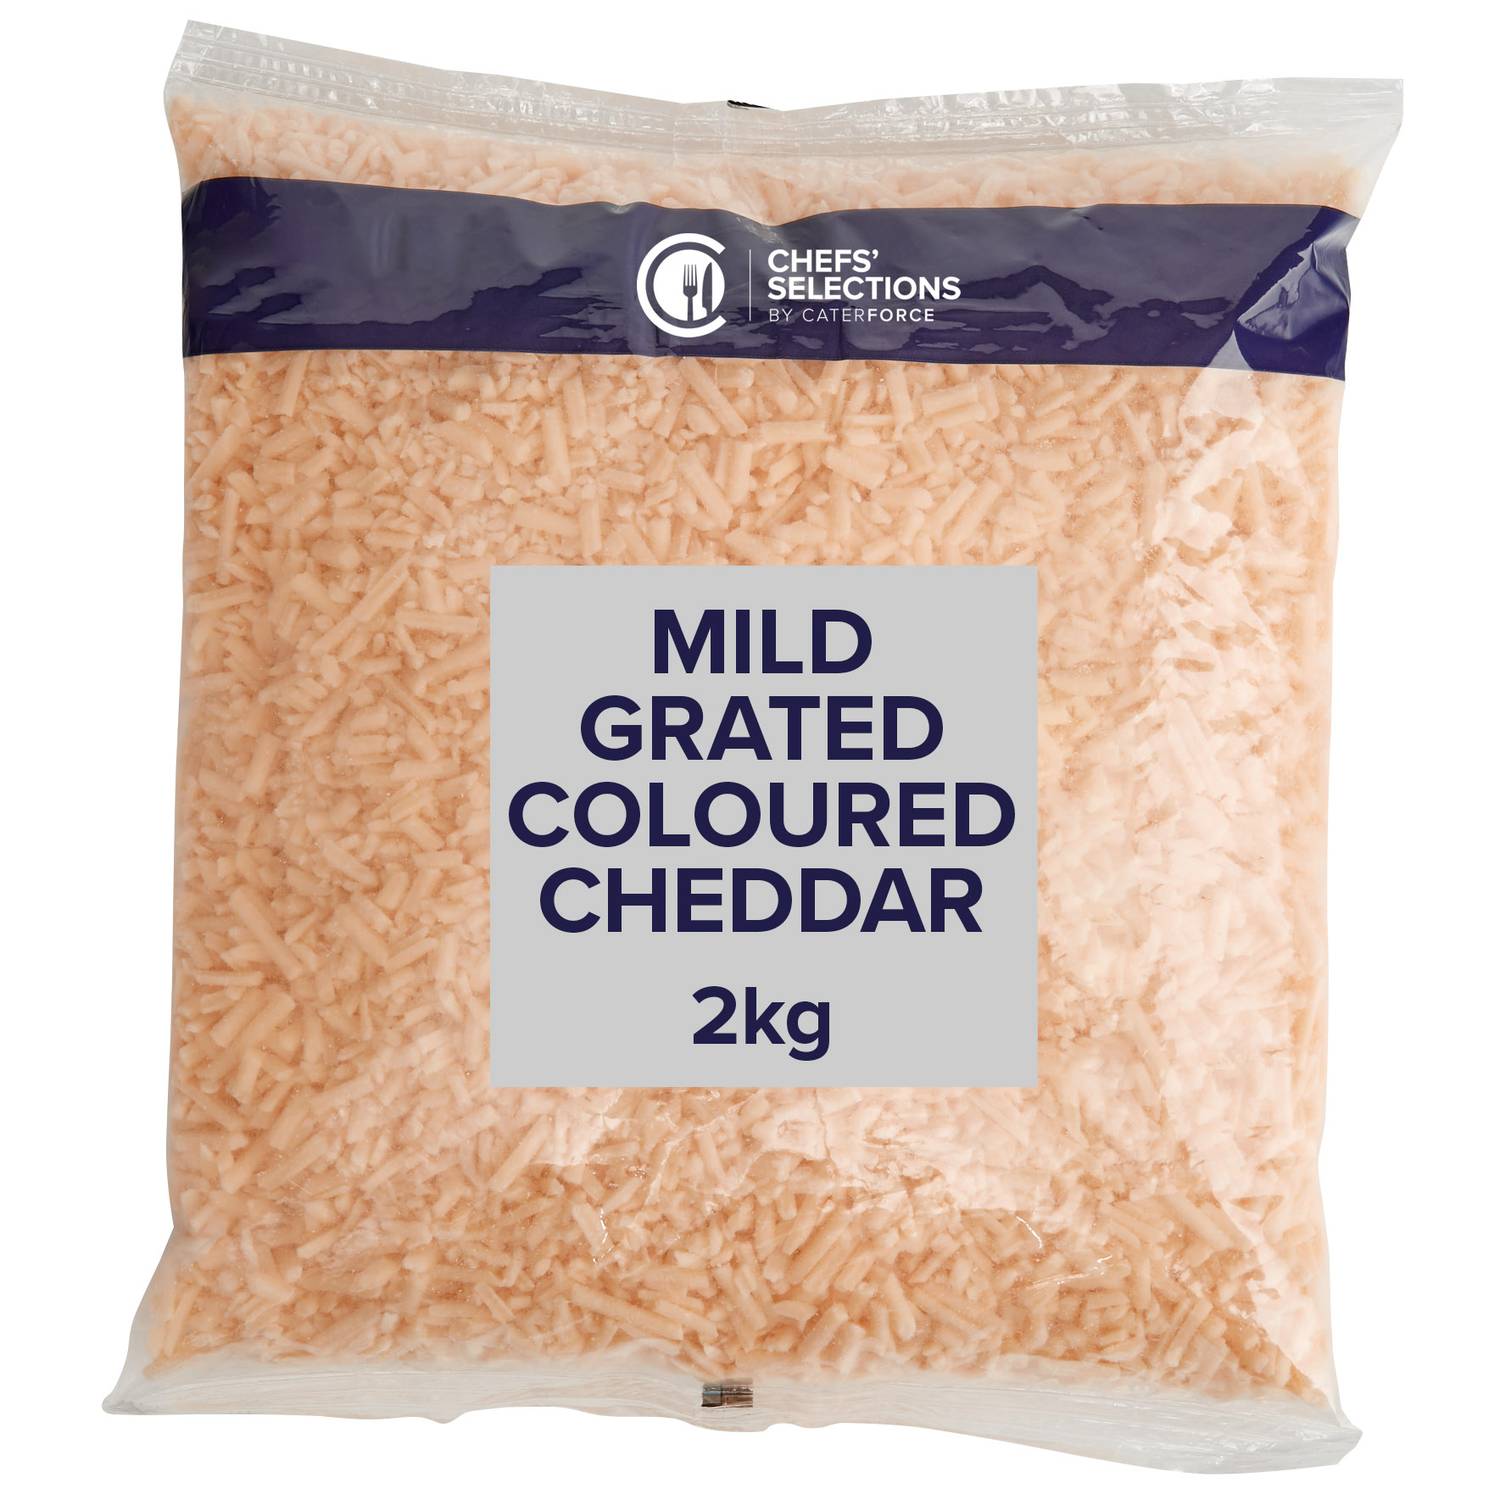 Chefs’ Selections Grated Coloured Mild Cheddar (6 x 2kg)